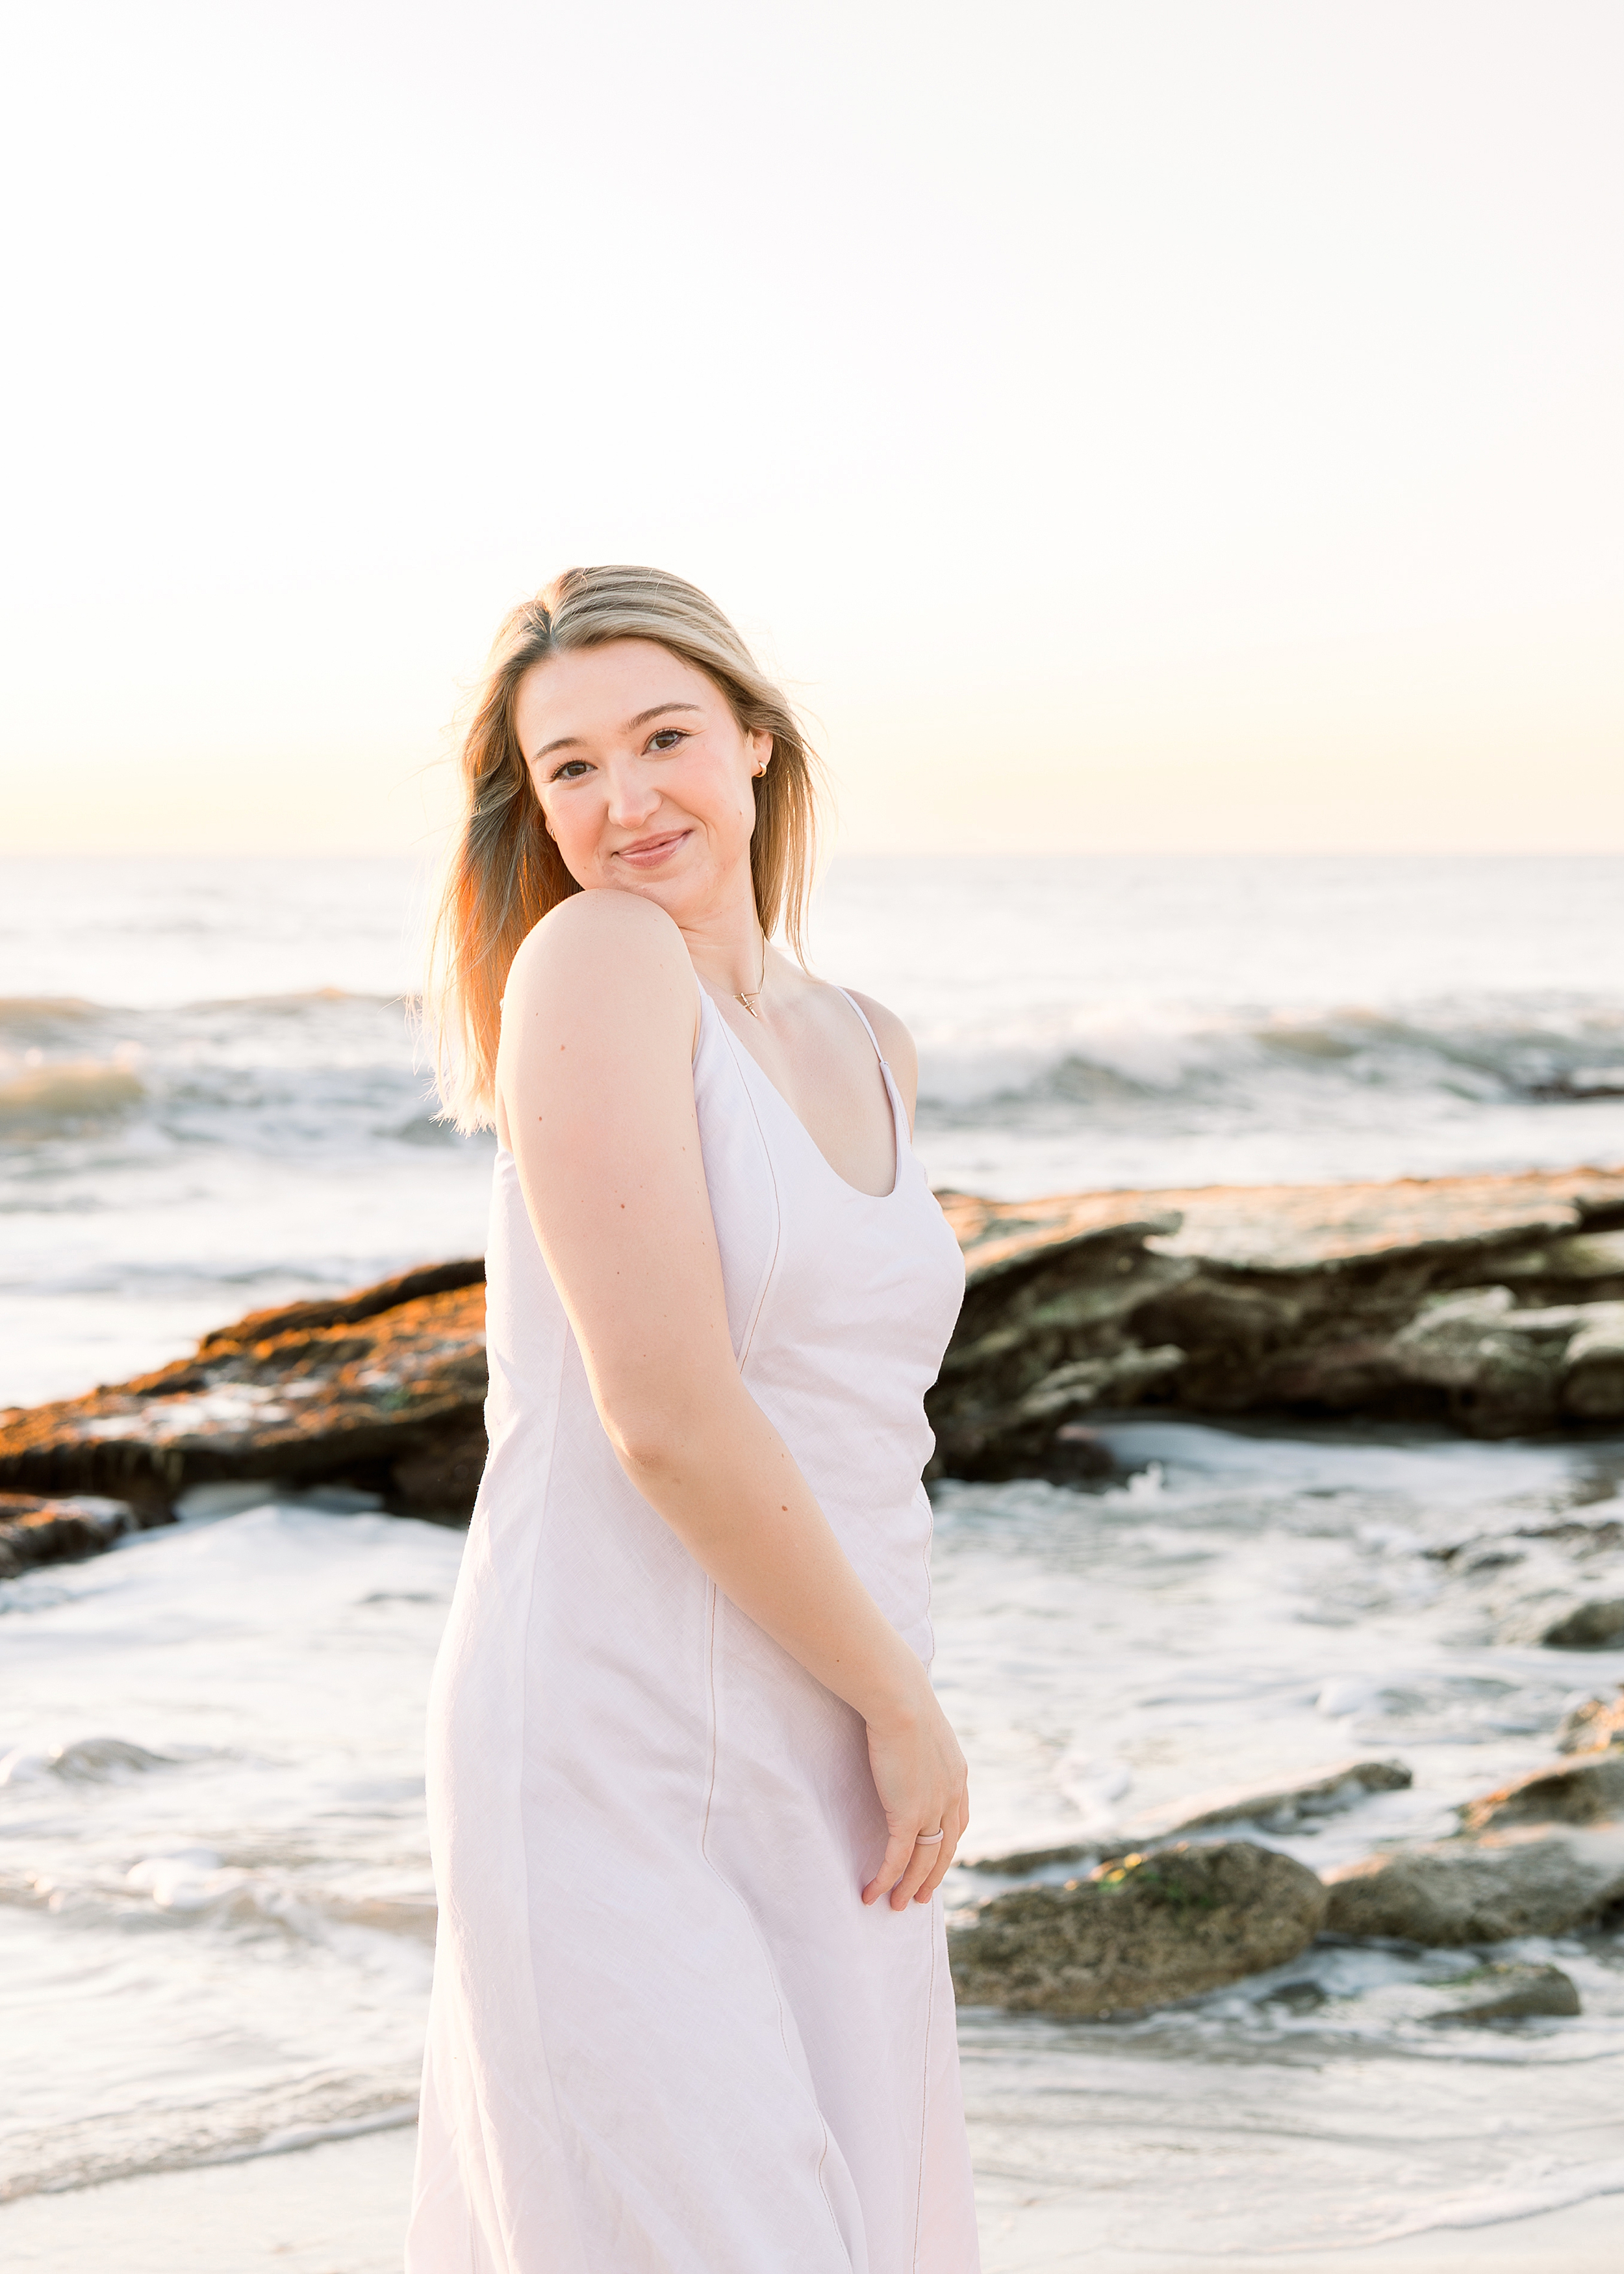 A sunrise portrait of a young woman dressed in white on the beach in Saint Augustine, Florida.